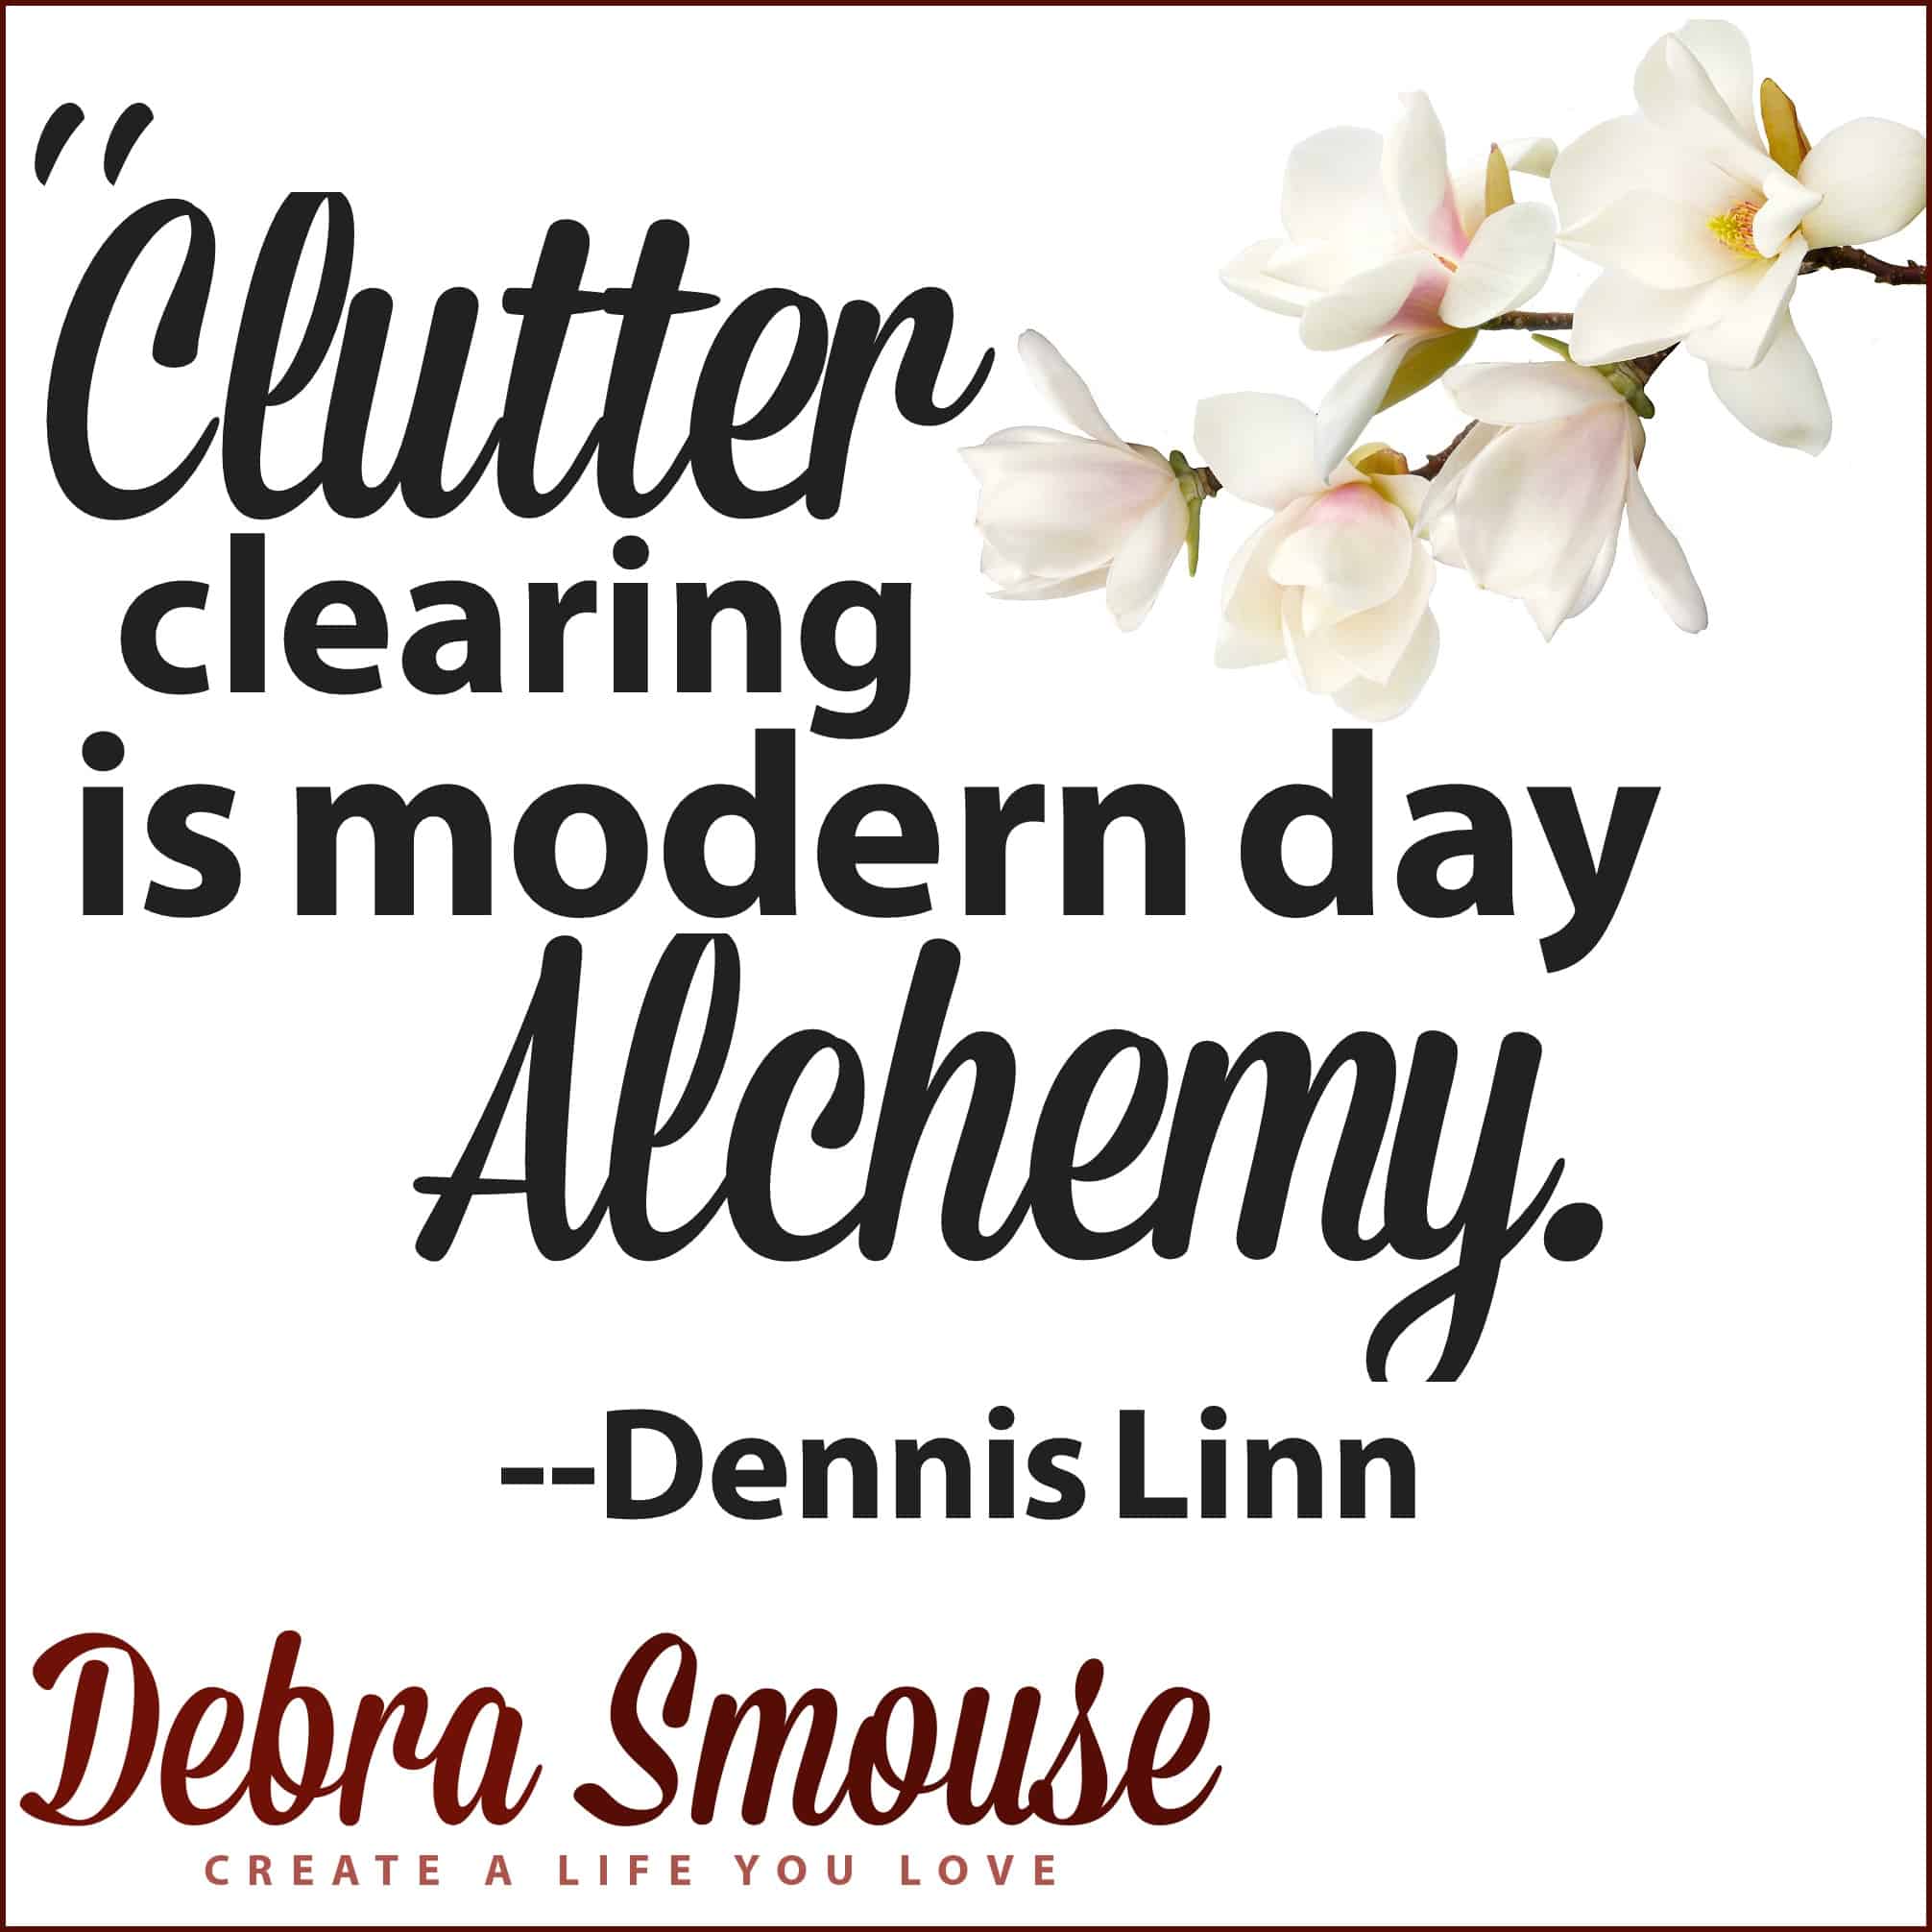 Inspiring Decluttering and Organization Quotes gathered by Debra Smouse